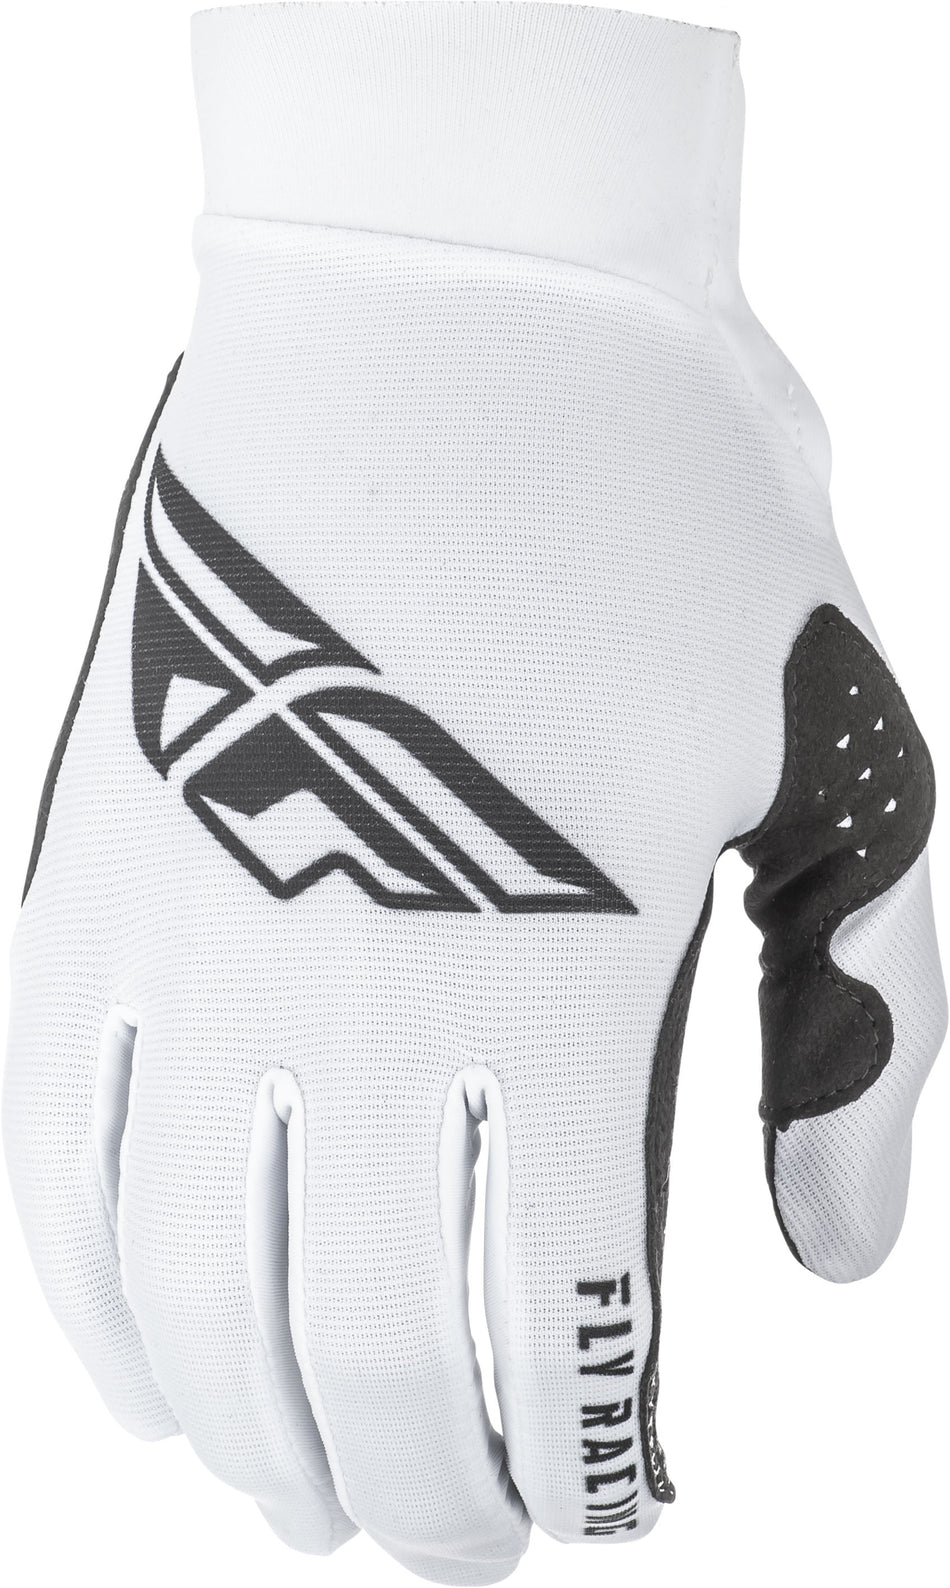 FLY RACING Pro Lite Gloves White Sz 13 372-81413